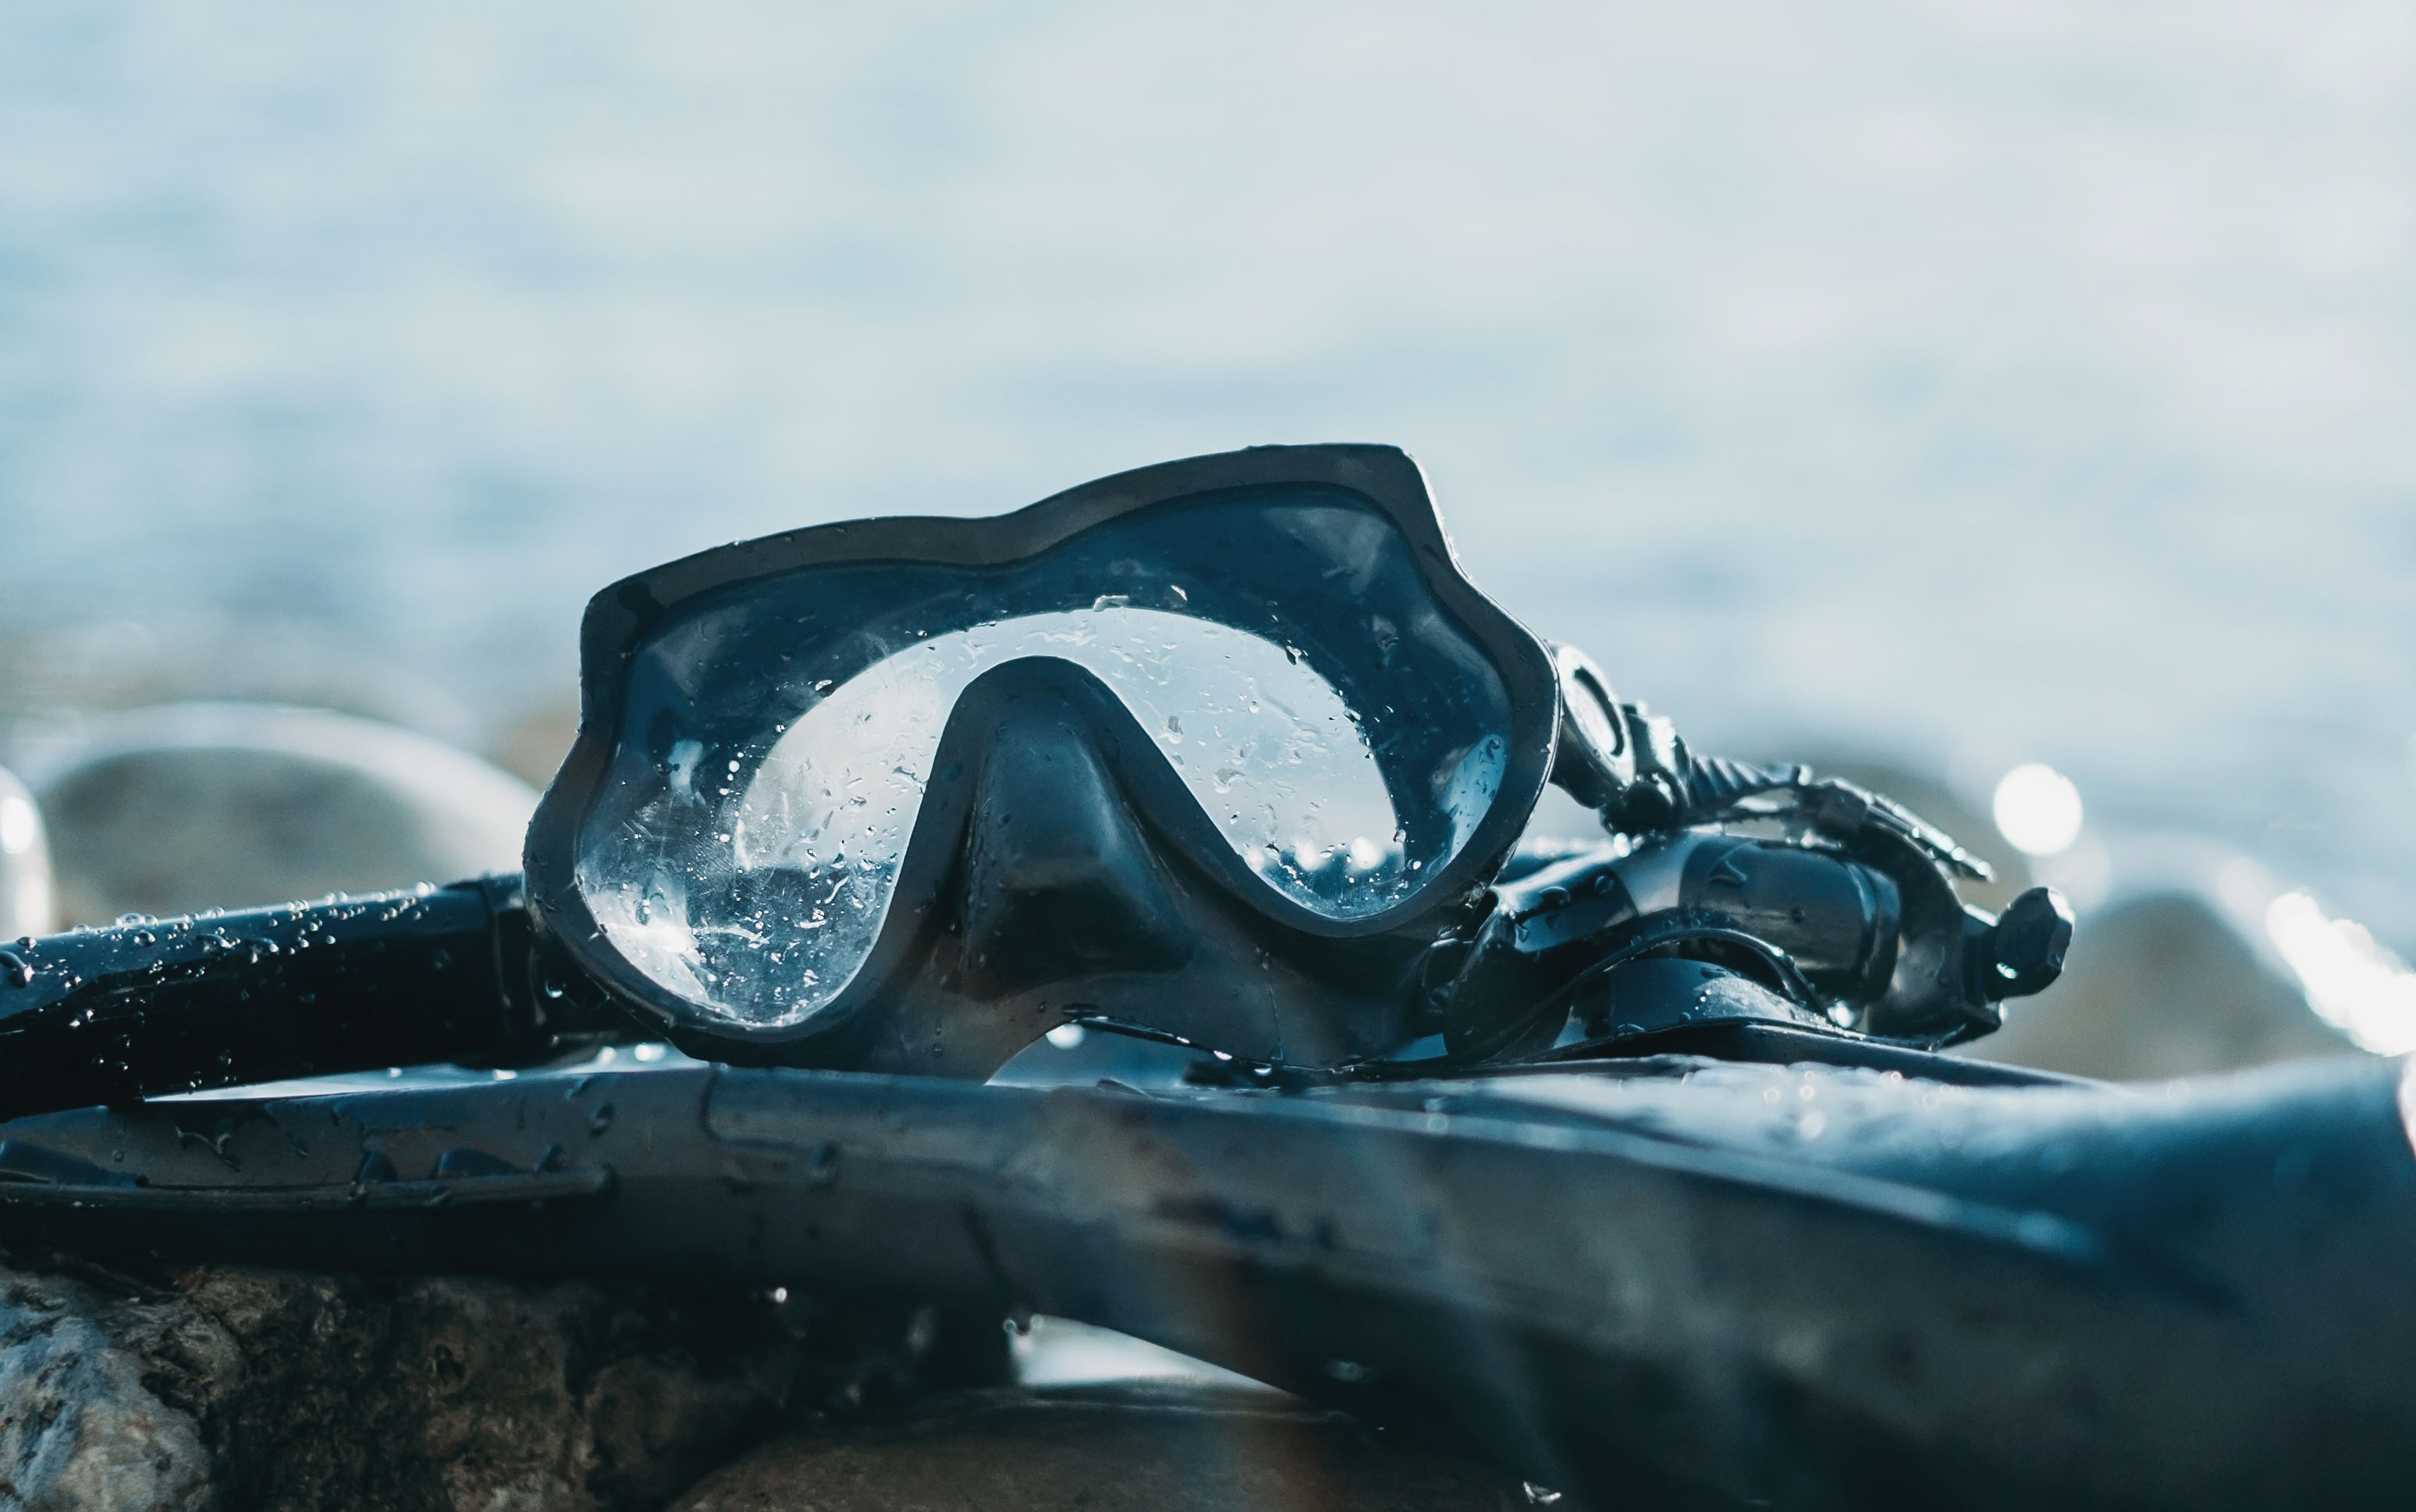 Freediving: Flippers and a diving mask - equipment for an active water sports discipline. 3100x1940 HD Wallpaper.